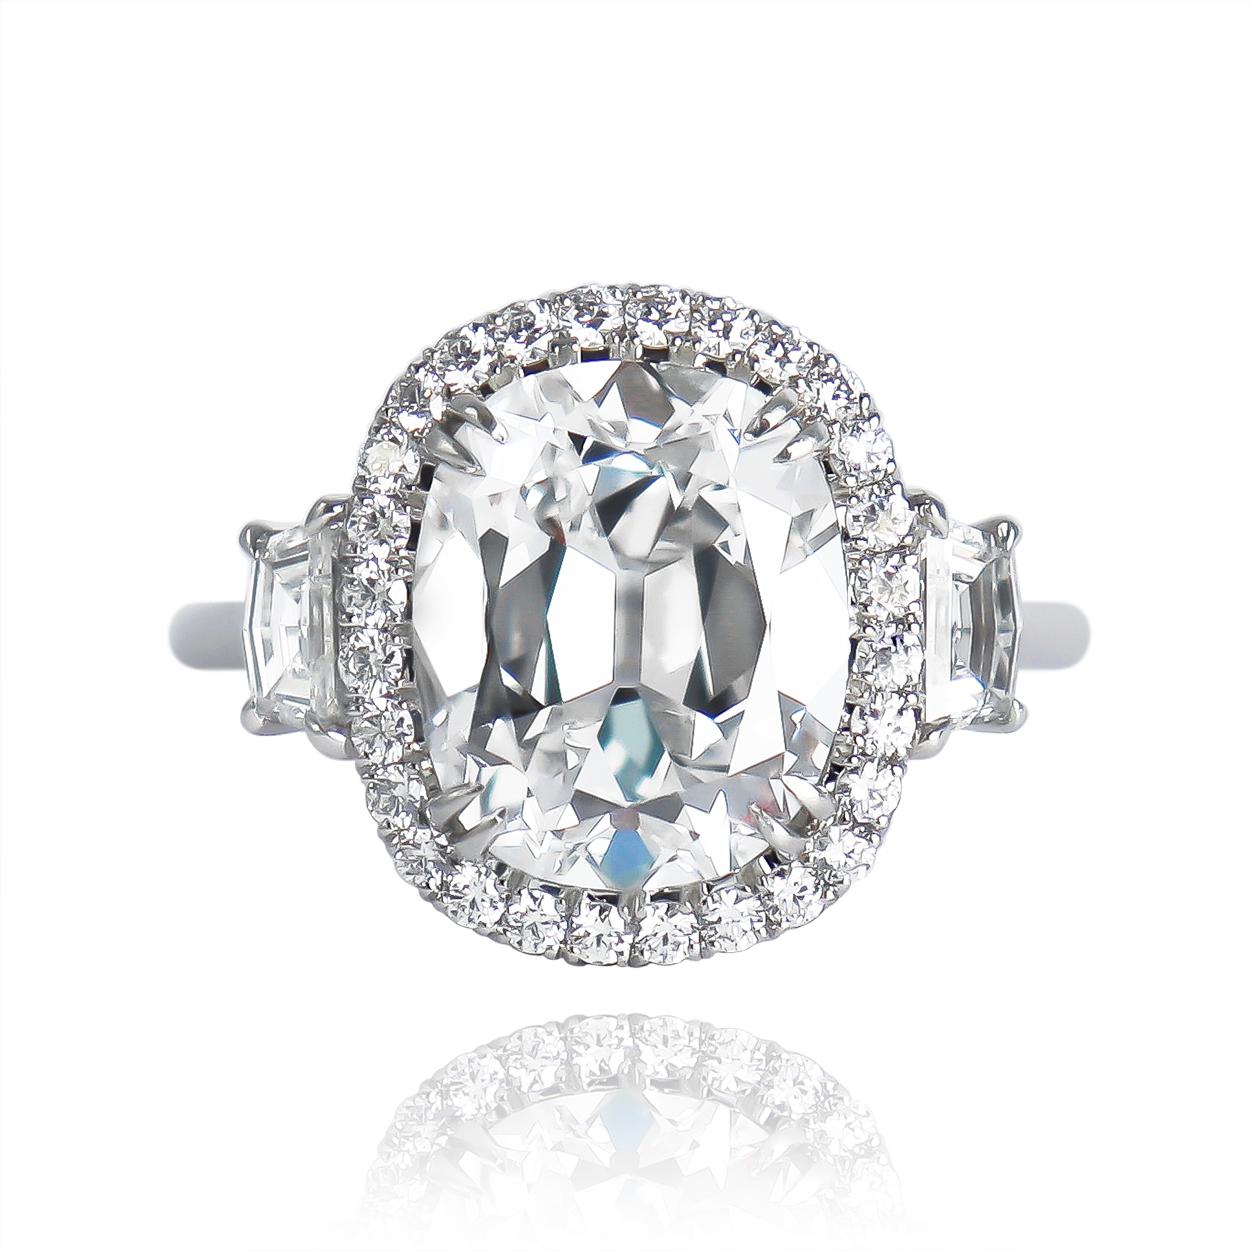 This incredible execution from the J. Birnbach workshop features a scintillating, 5.01 carat cushion brilliant cut diamond of E color and SI1 clarity set in a handmade, platinum ring. The optical properties of this stone are mesmerizing - the